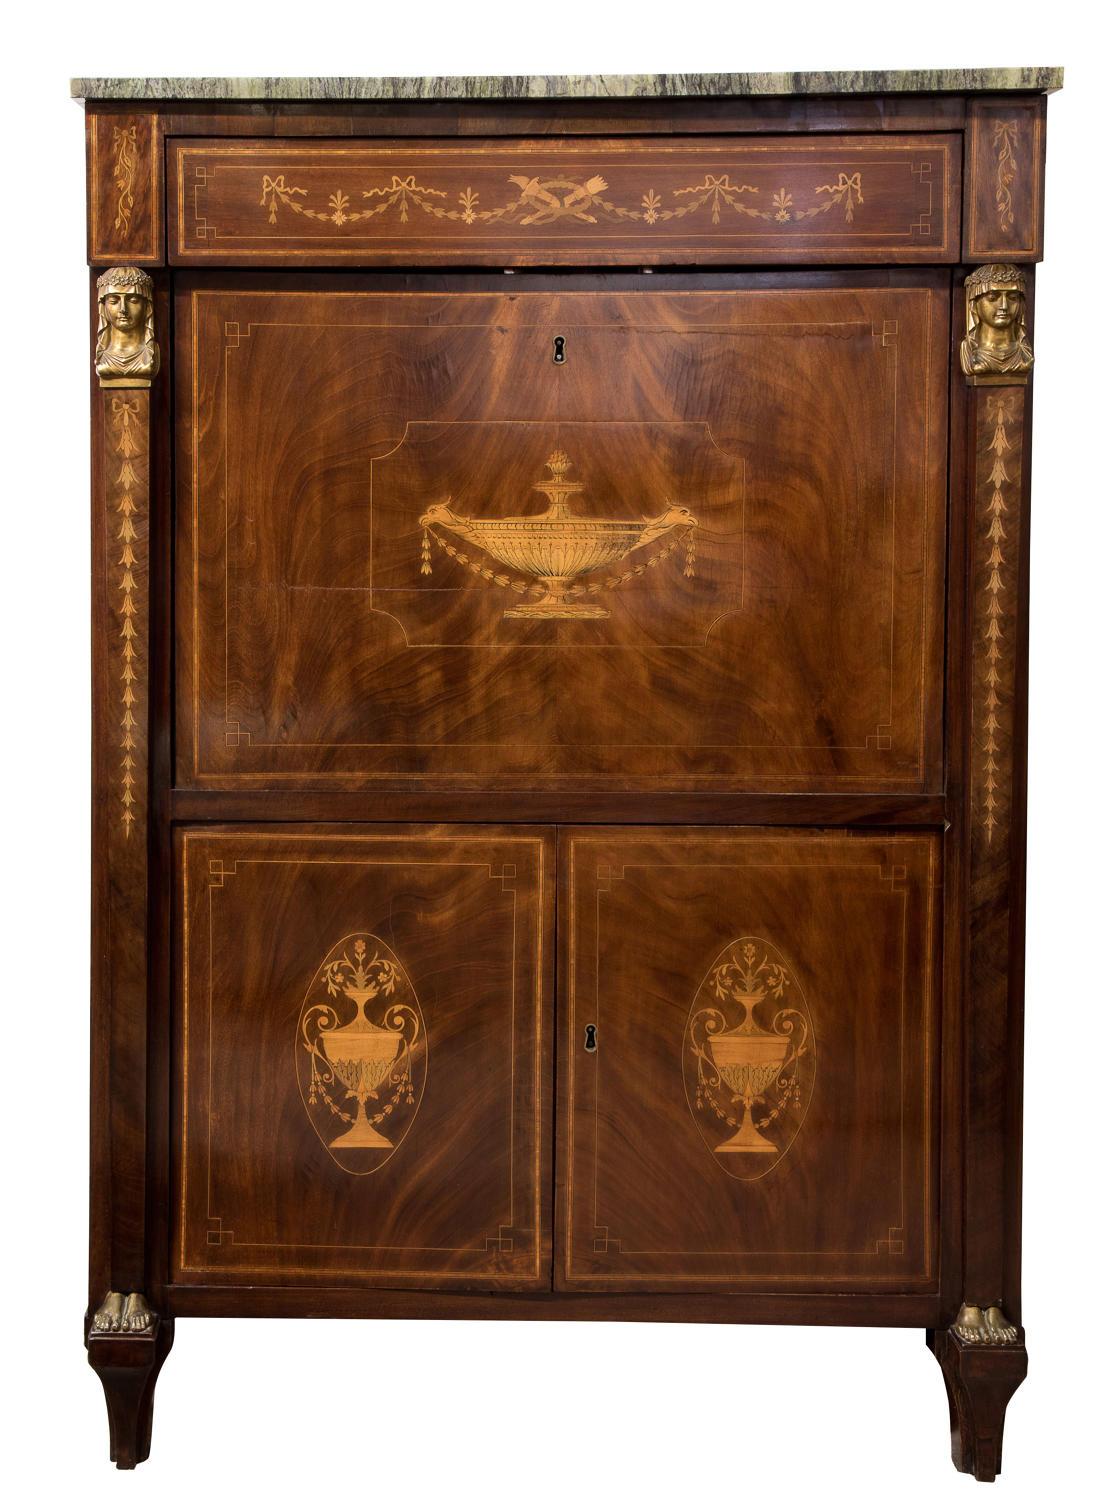 A 19th century French secretaire a' abbatant. The marble top over a marquetry inlaid mahogany base with a single drawer over the fall front and pair of lower cupboards flanked by caryatid mounts.